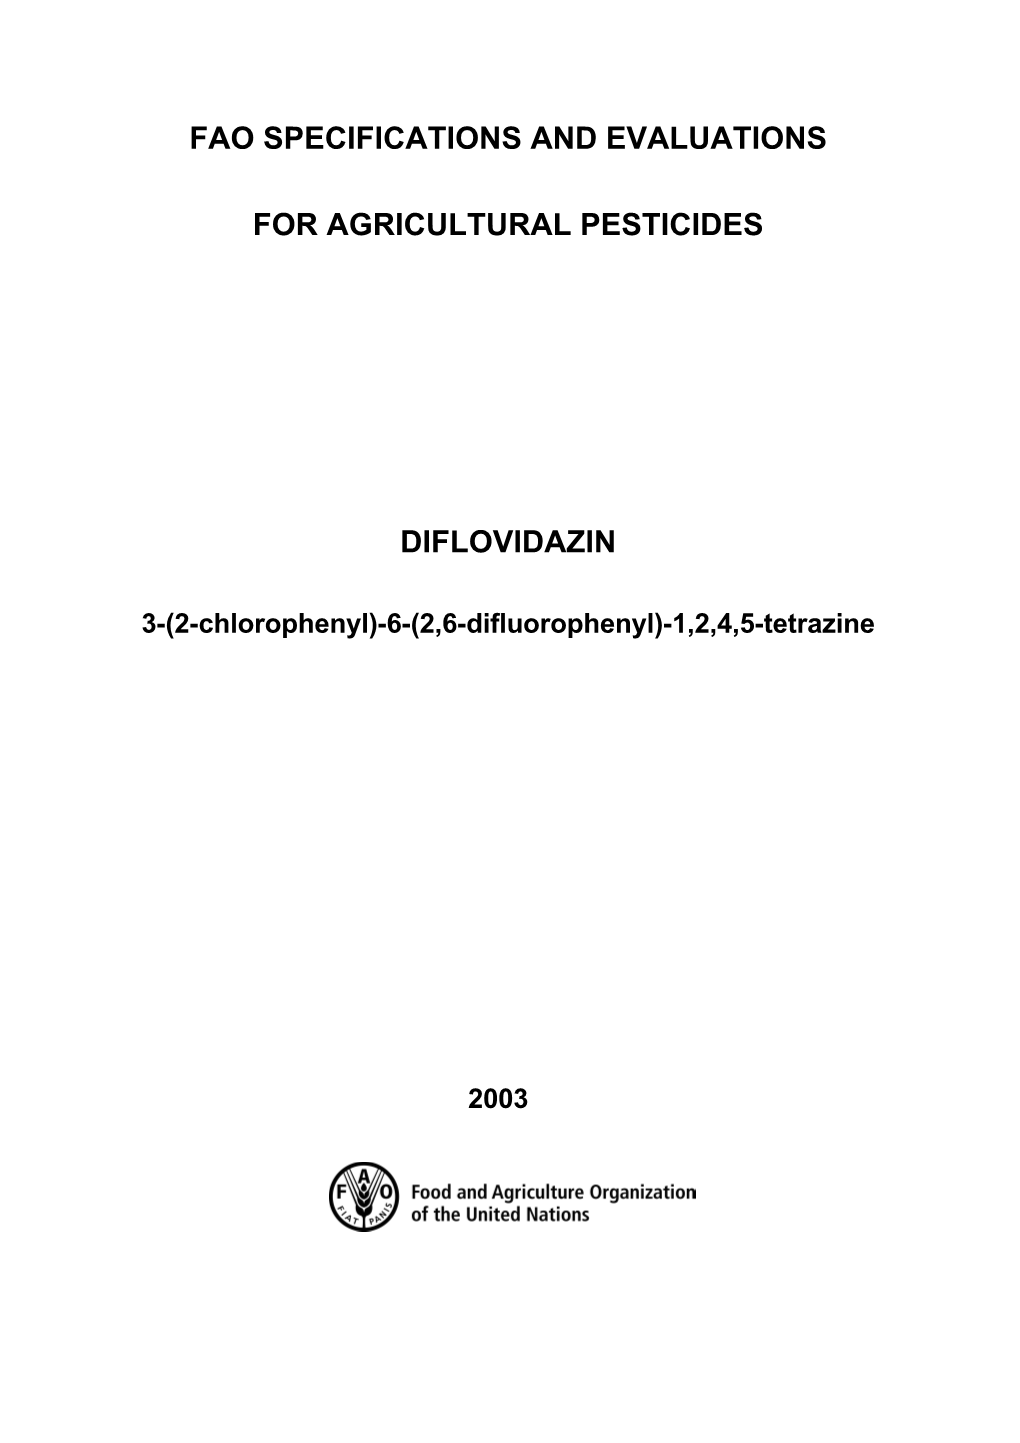 FAO Specifications and Evaluations for Agricultural Pesticides